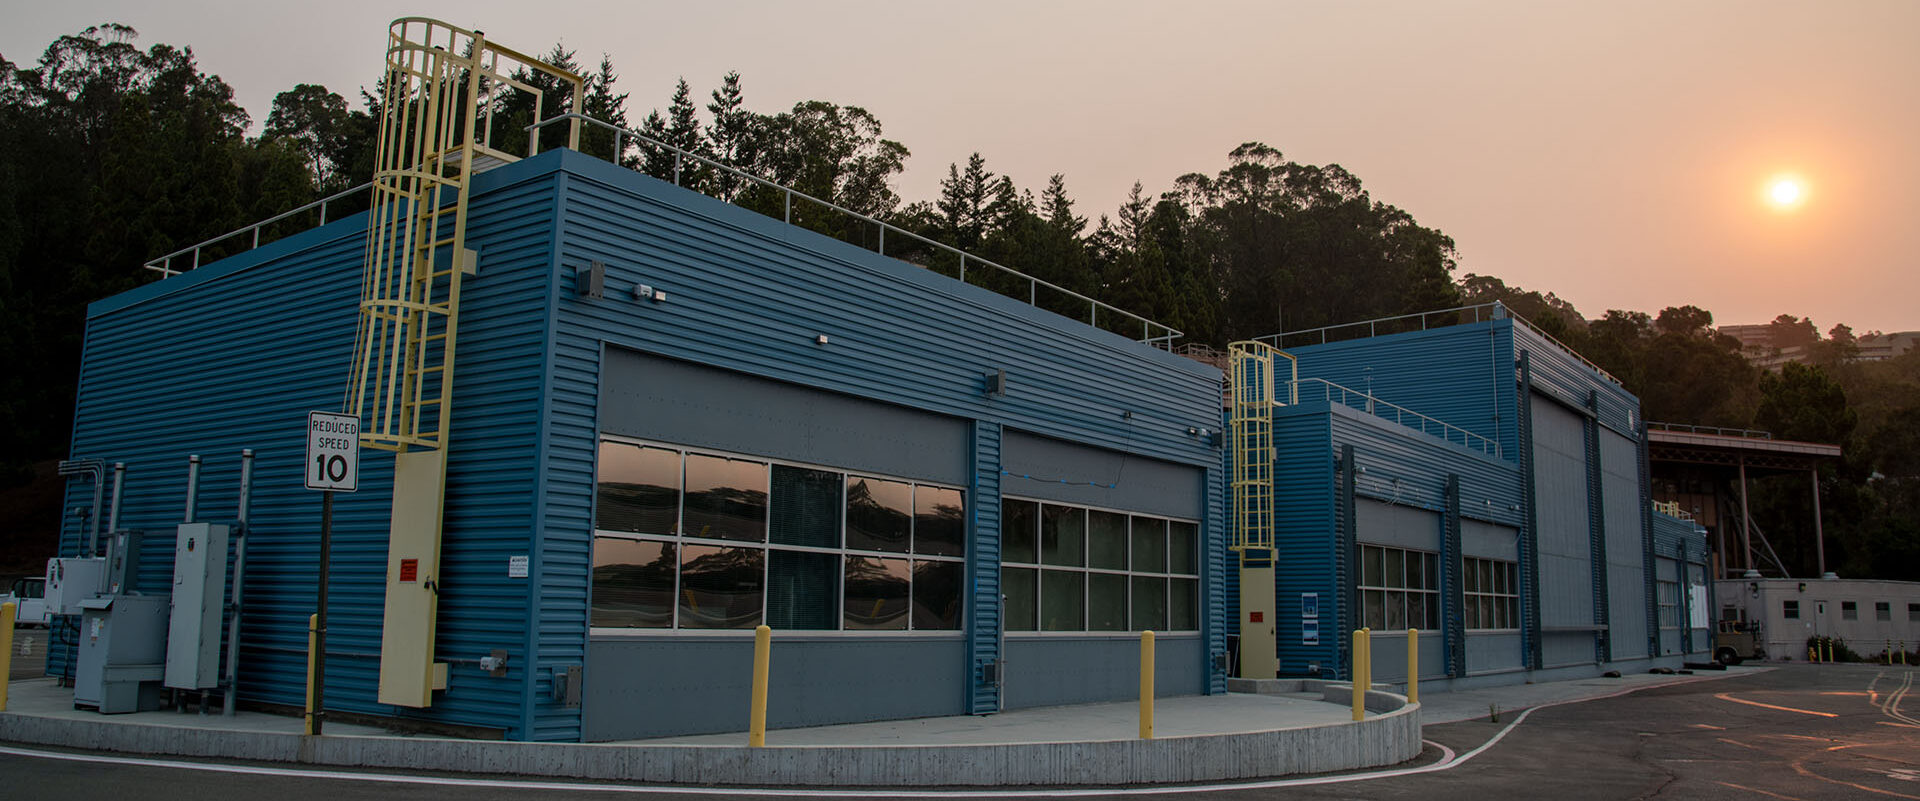 The sun is obscured behind smokey skies over FLEXLAB™ at Lawrence Berkeley National Laboratory.